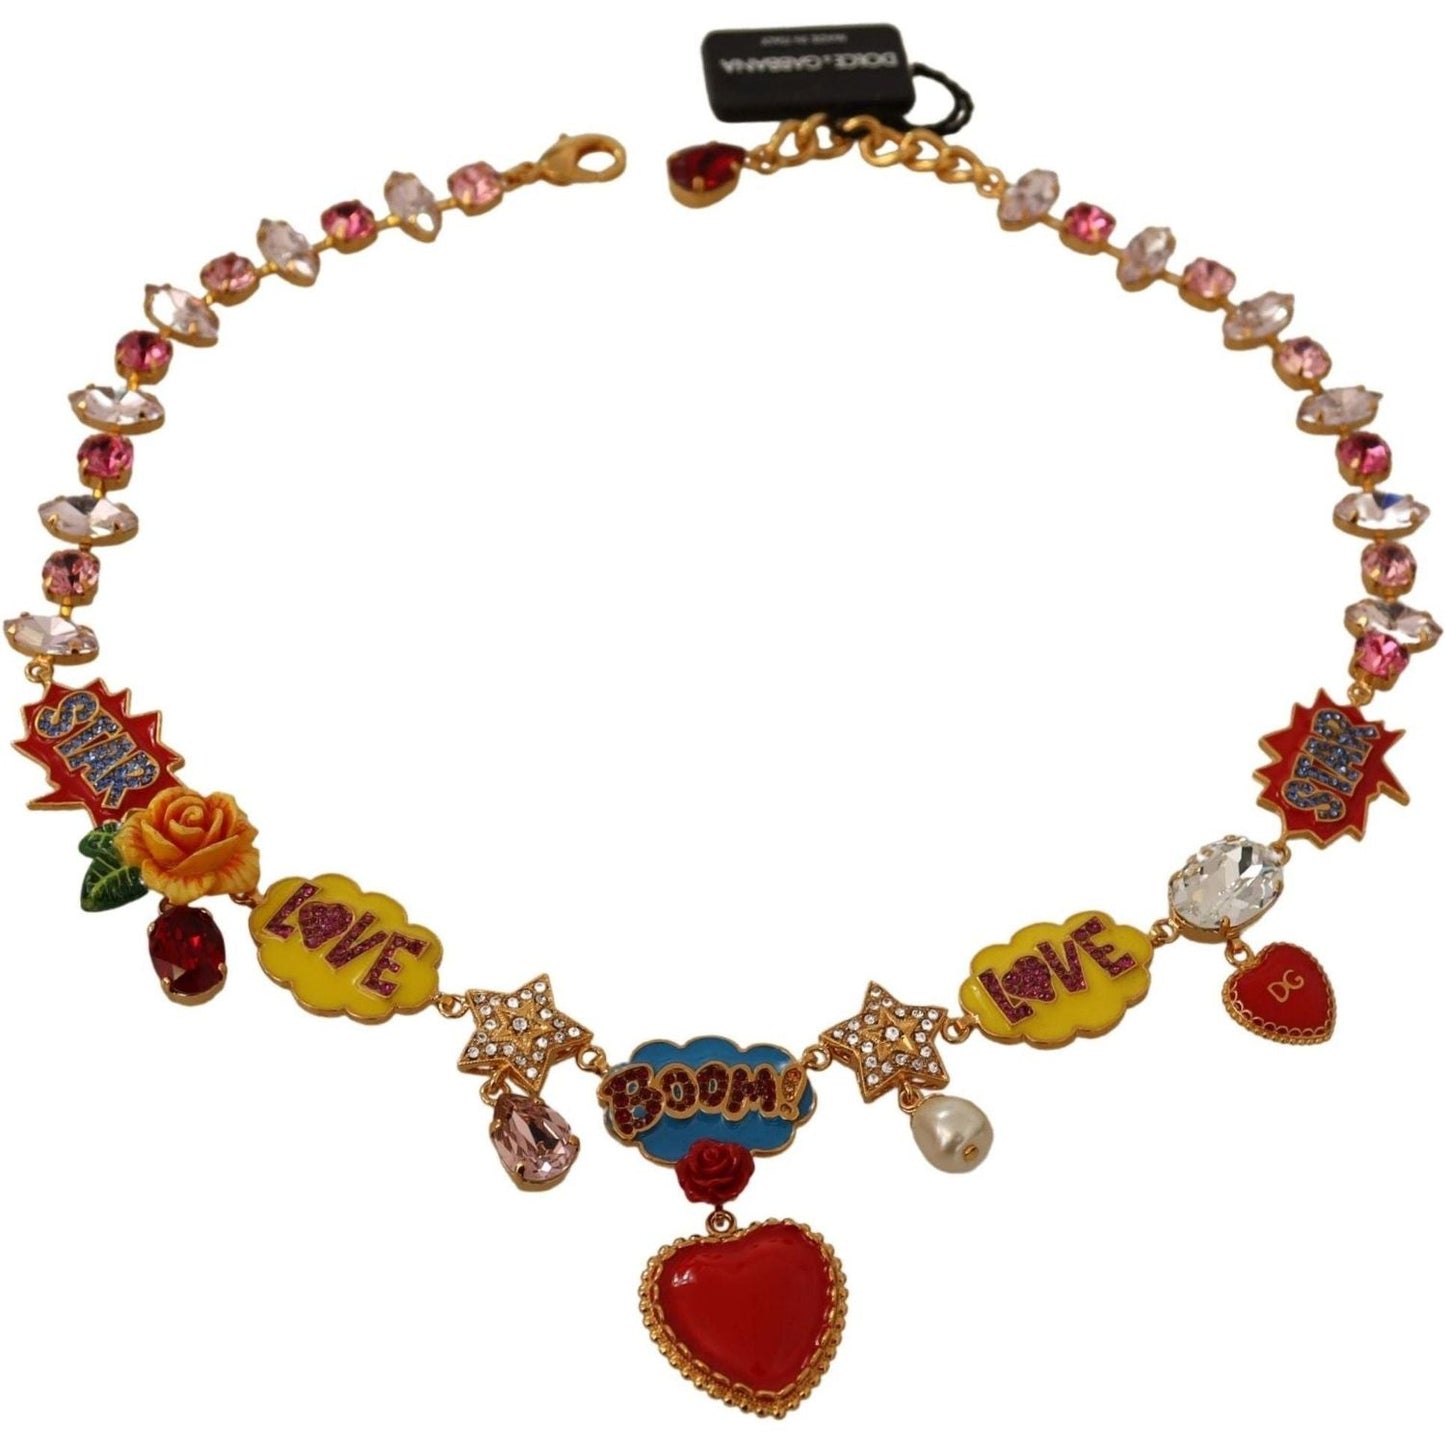 Dolce & Gabbana Charm Necklace with Hand-Painted Elements rose-heart-star-chain-pink-red-gold-crystal-necklace